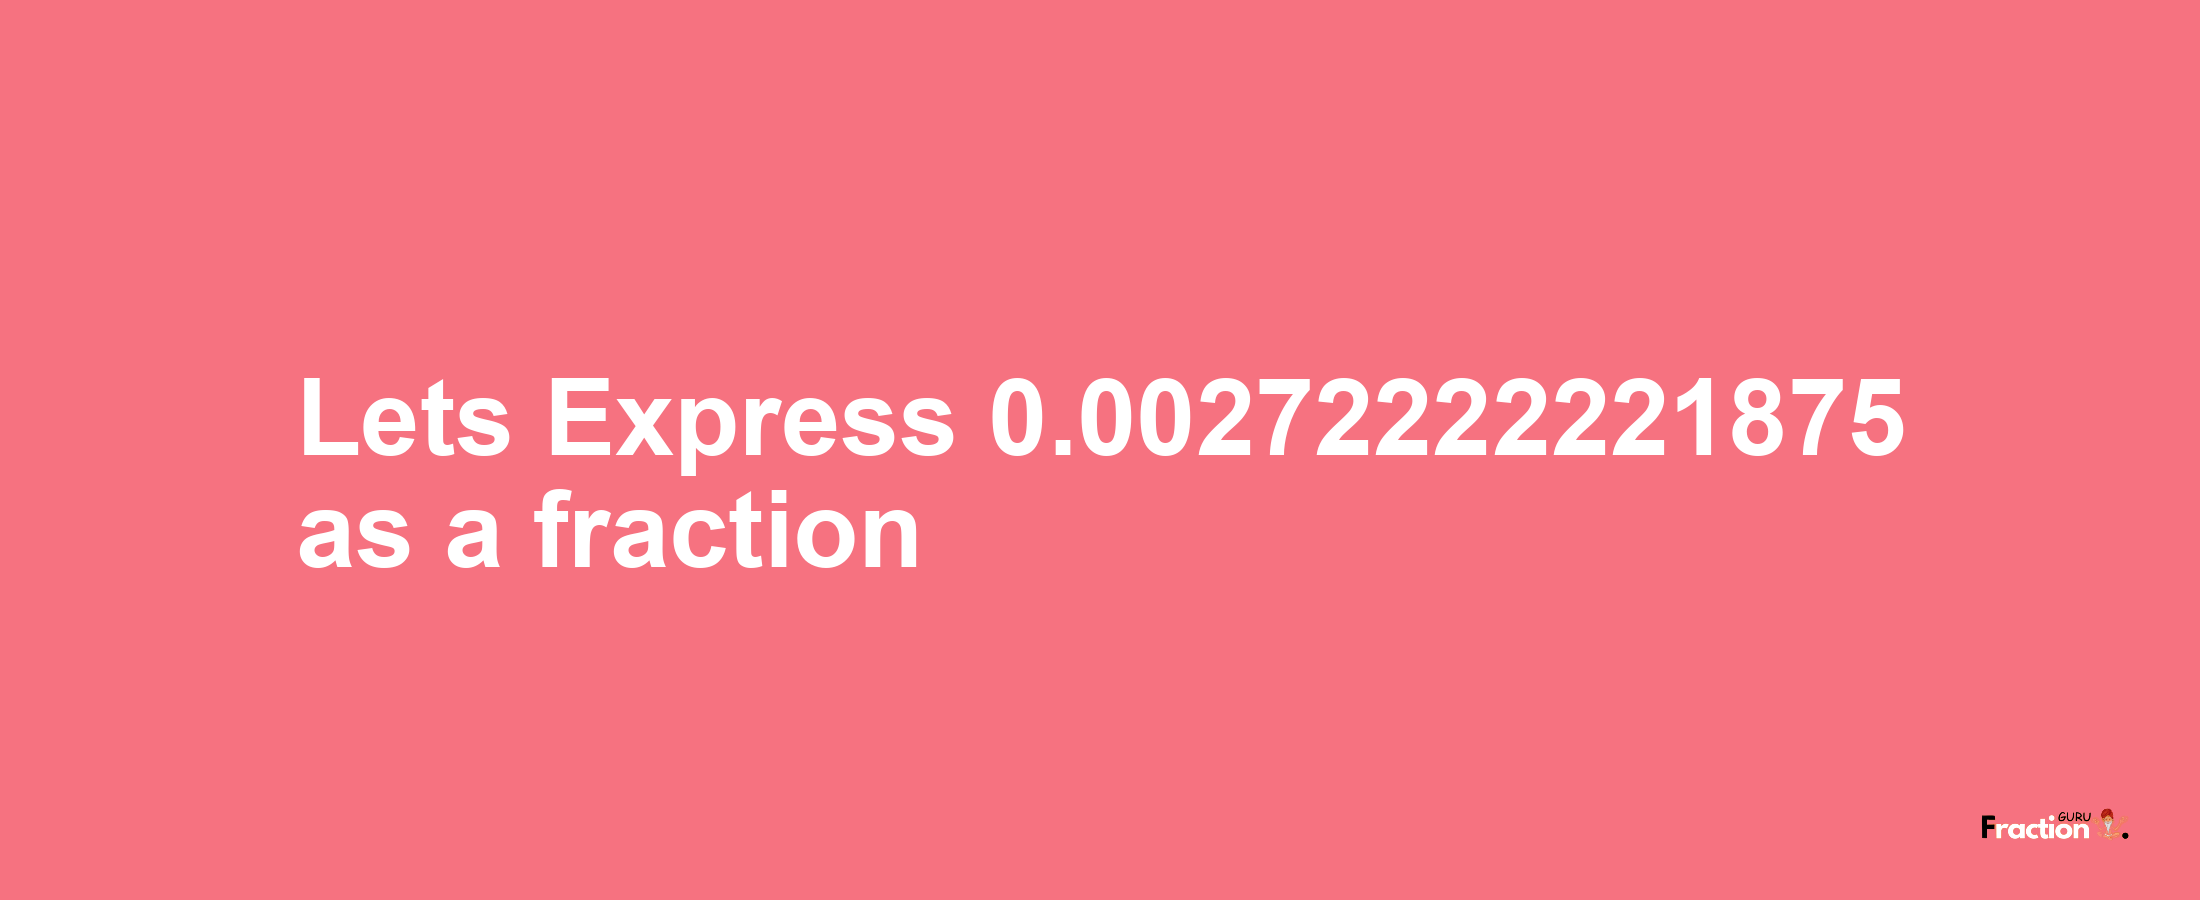 Lets Express 0.00272222221875 as afraction